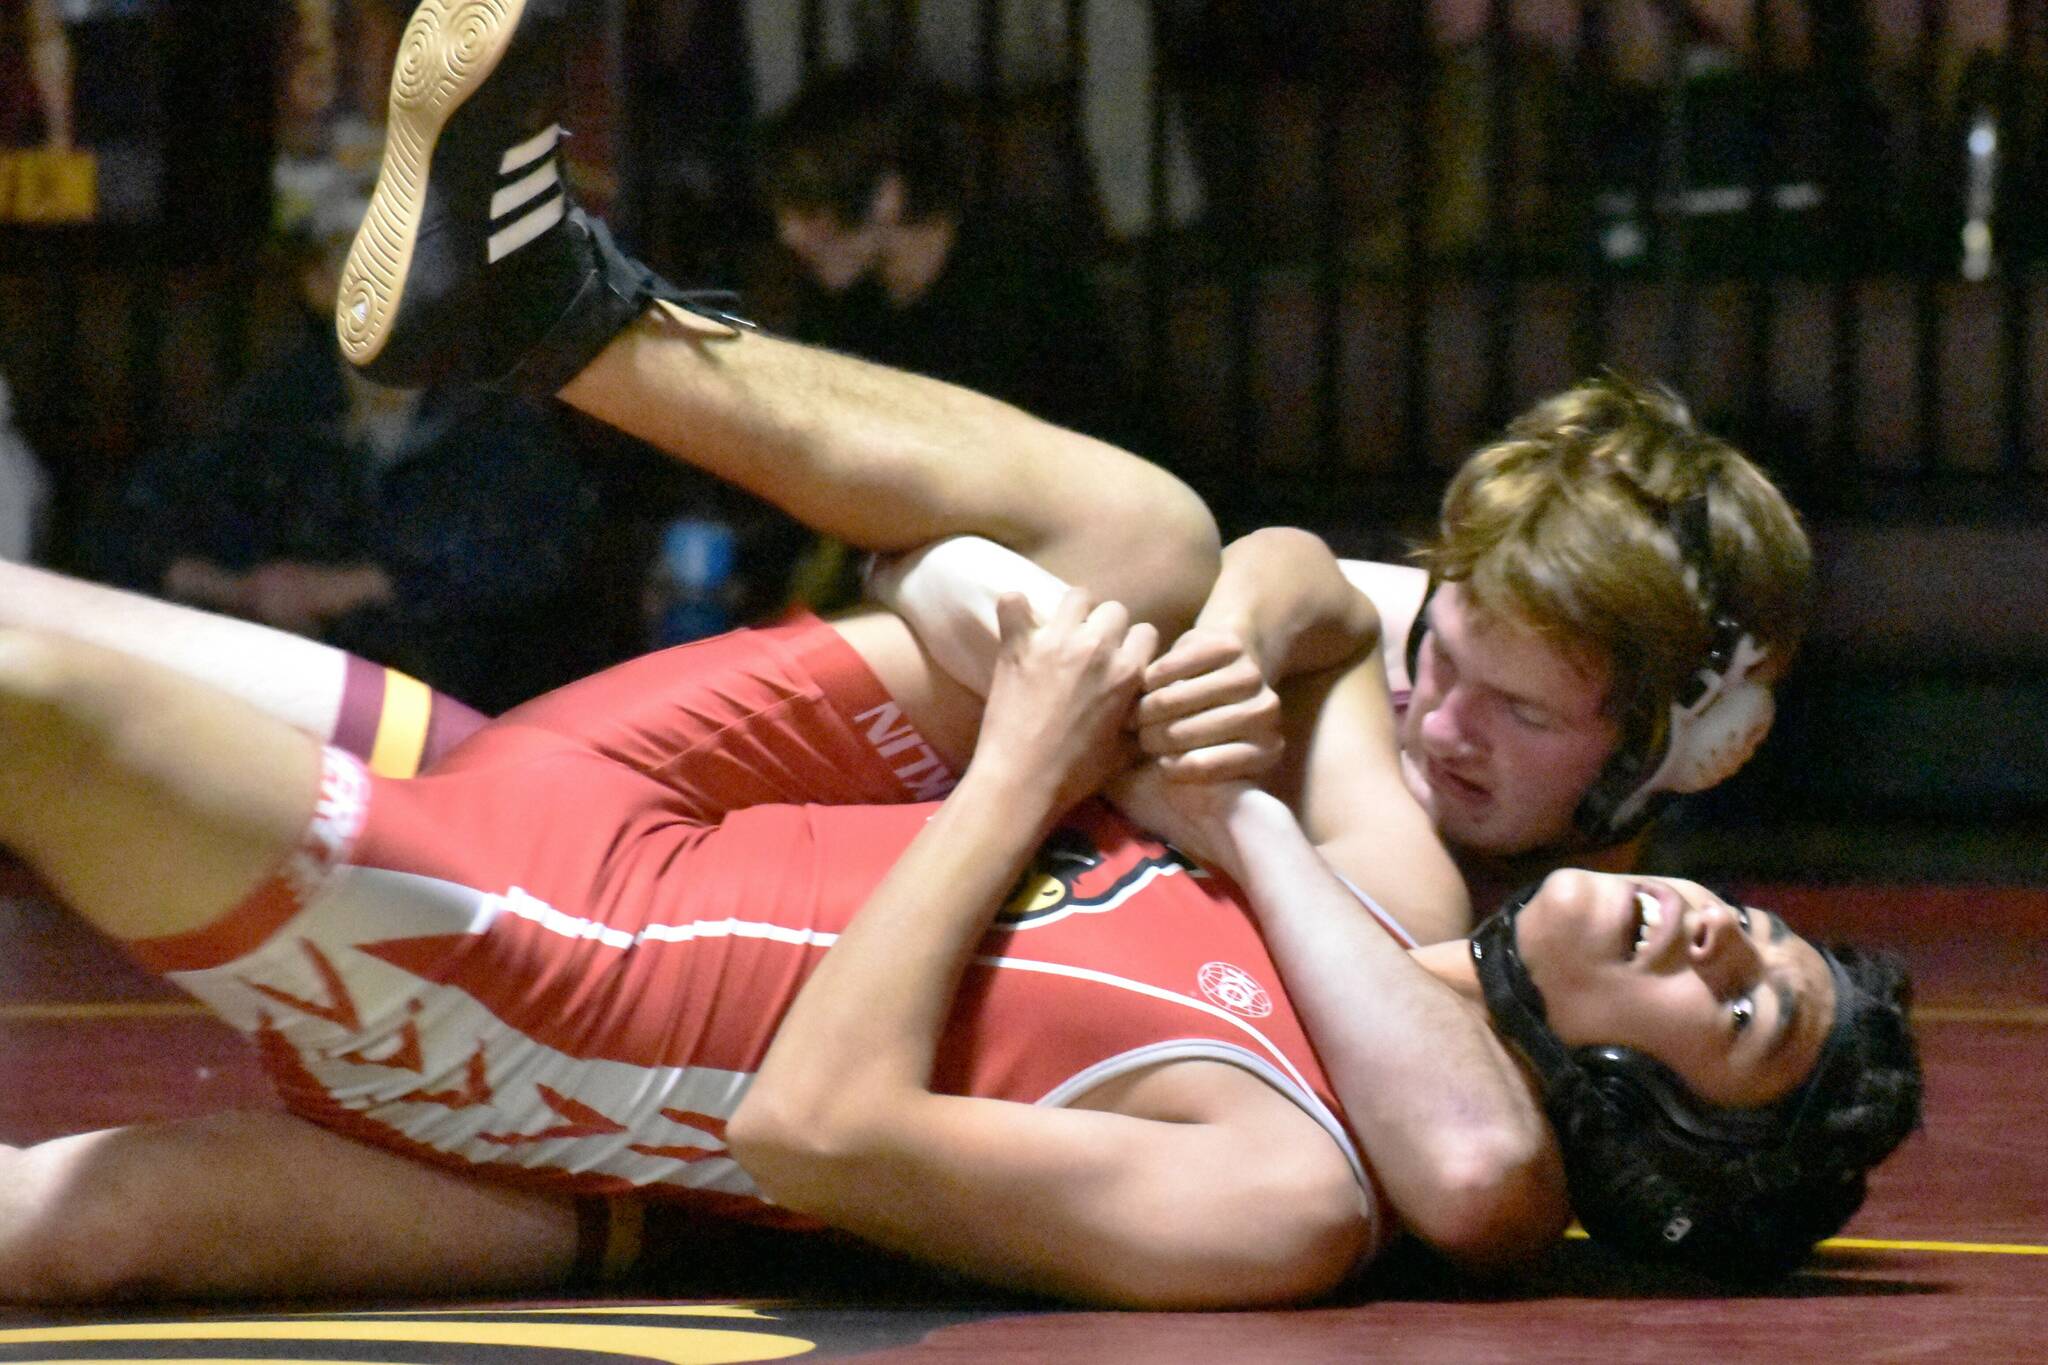 Pictured is Jacob Balliet preparing to pin his Franklin Pierce foe. Photo by Kevin Hanson